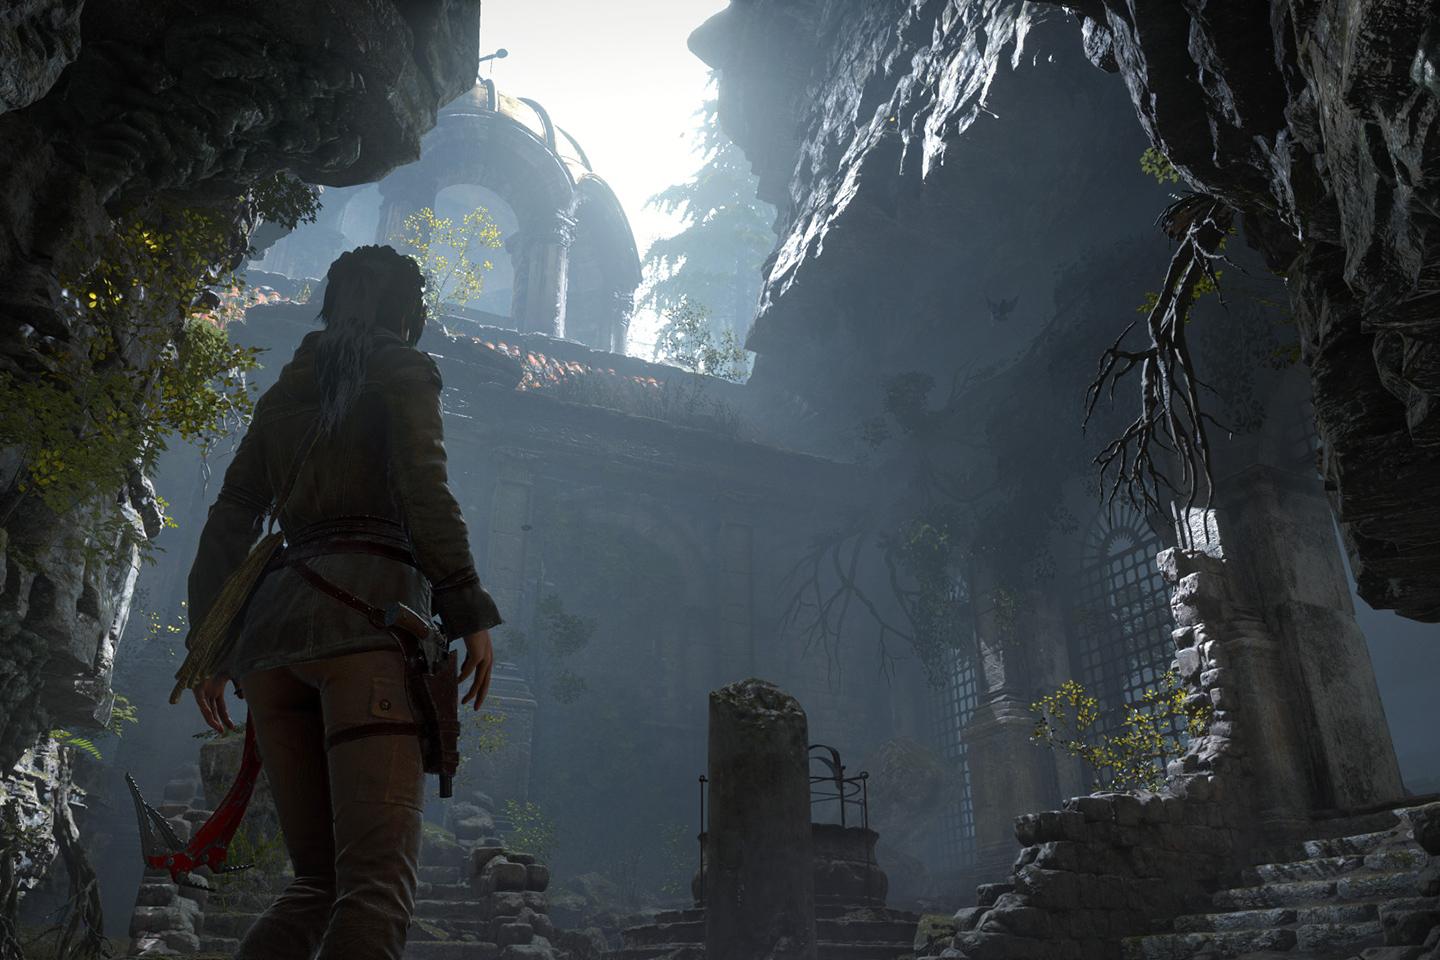 In-game screenshot of Lara Croft in Rise of the Tomb Raider, standing at the entrance of an ancient, sunlit temple surrounded by ruins and overgrown vegetation.